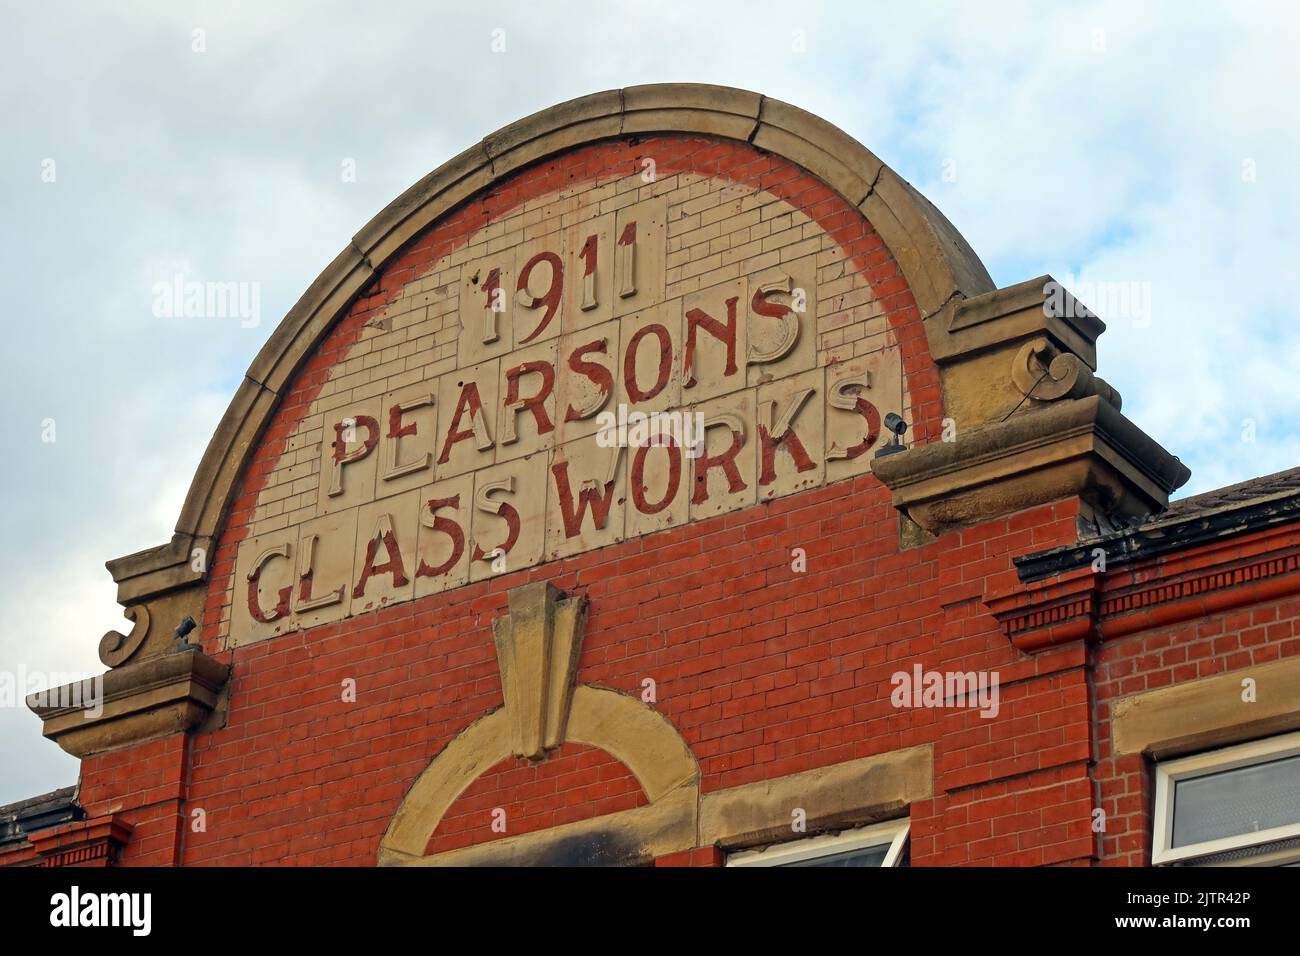 1911 Pearsons Glass Works building - 2, Empire Street, off Cheetham Hill Road, Manchester, England, UK, M3 1JA, now Empire House Banqueting Stock Photo